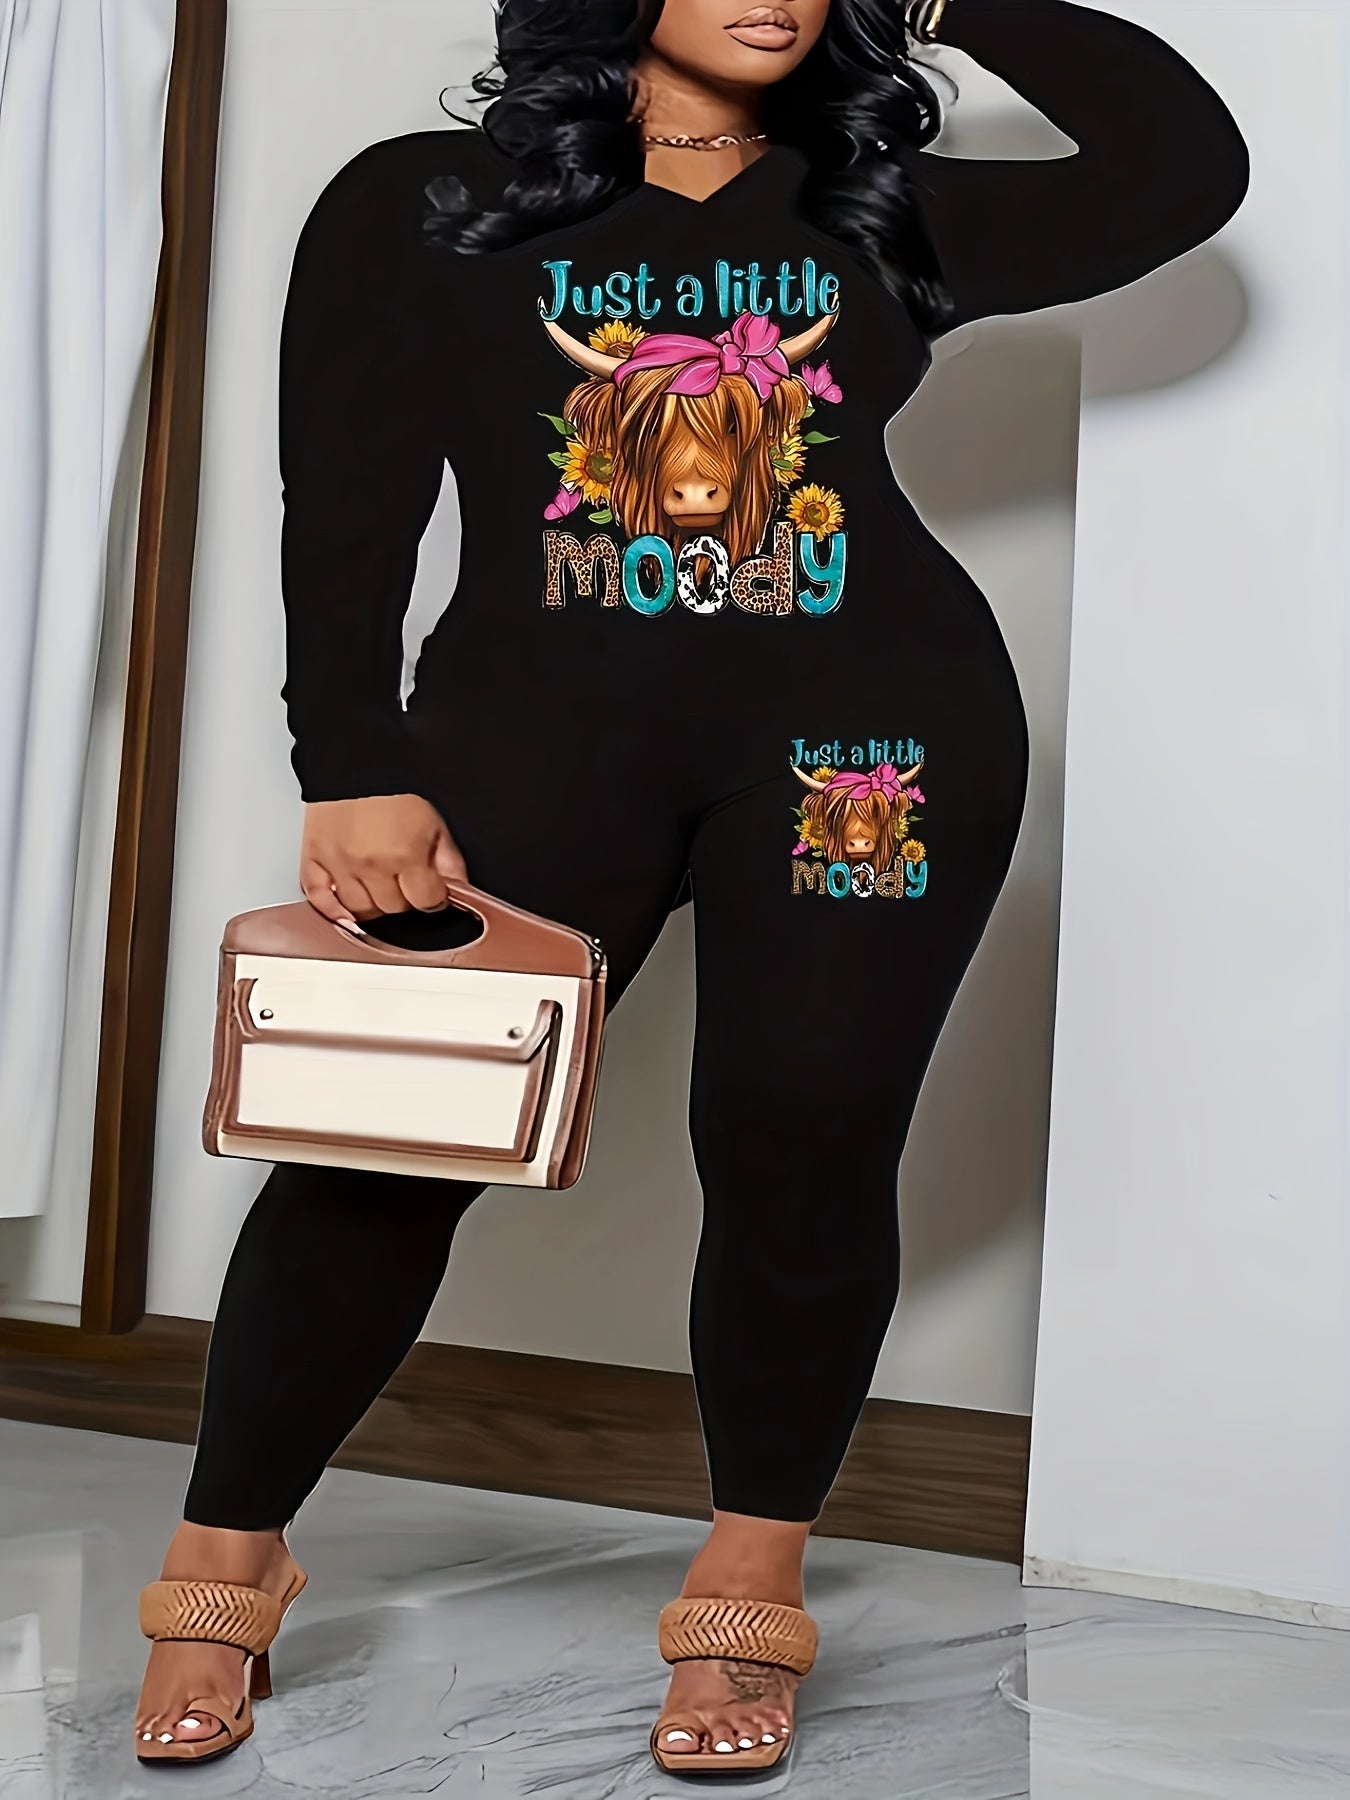 Alot Can Happen In 3 Days Plus Size Women's Christian Casual Outfit claimedbygoddesigns